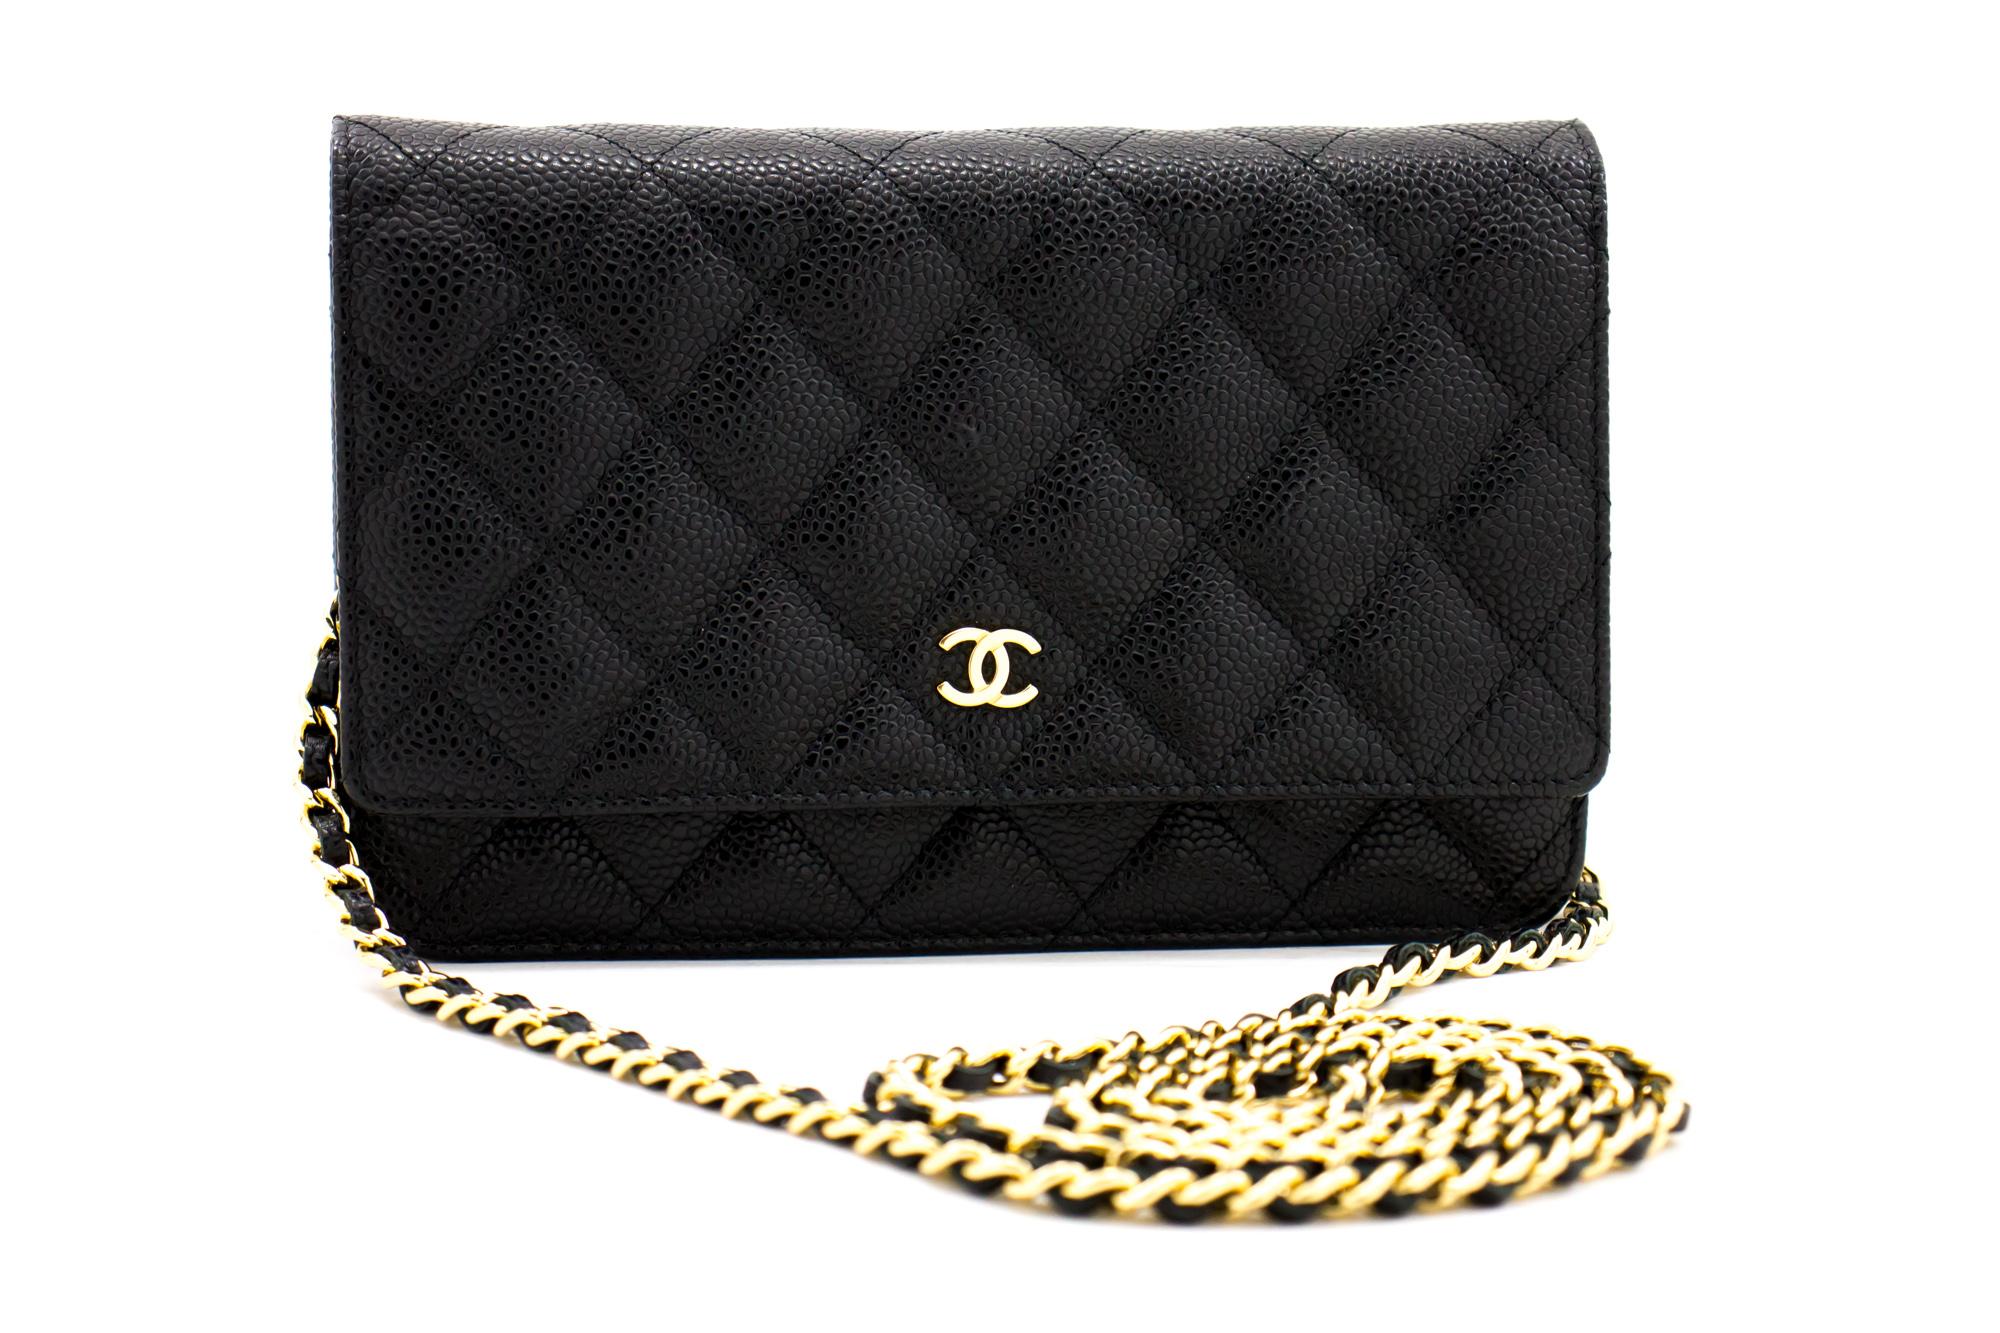 An authentic CHANEL Caviar Wallet On Chain WOC Black Shoulder Bag Crossbody. The color is Black. The outside material is Leather. The pattern is Solid. This item is Contemporary. The year of manufacture would be 2014.
Conditions & Ratings
Outside